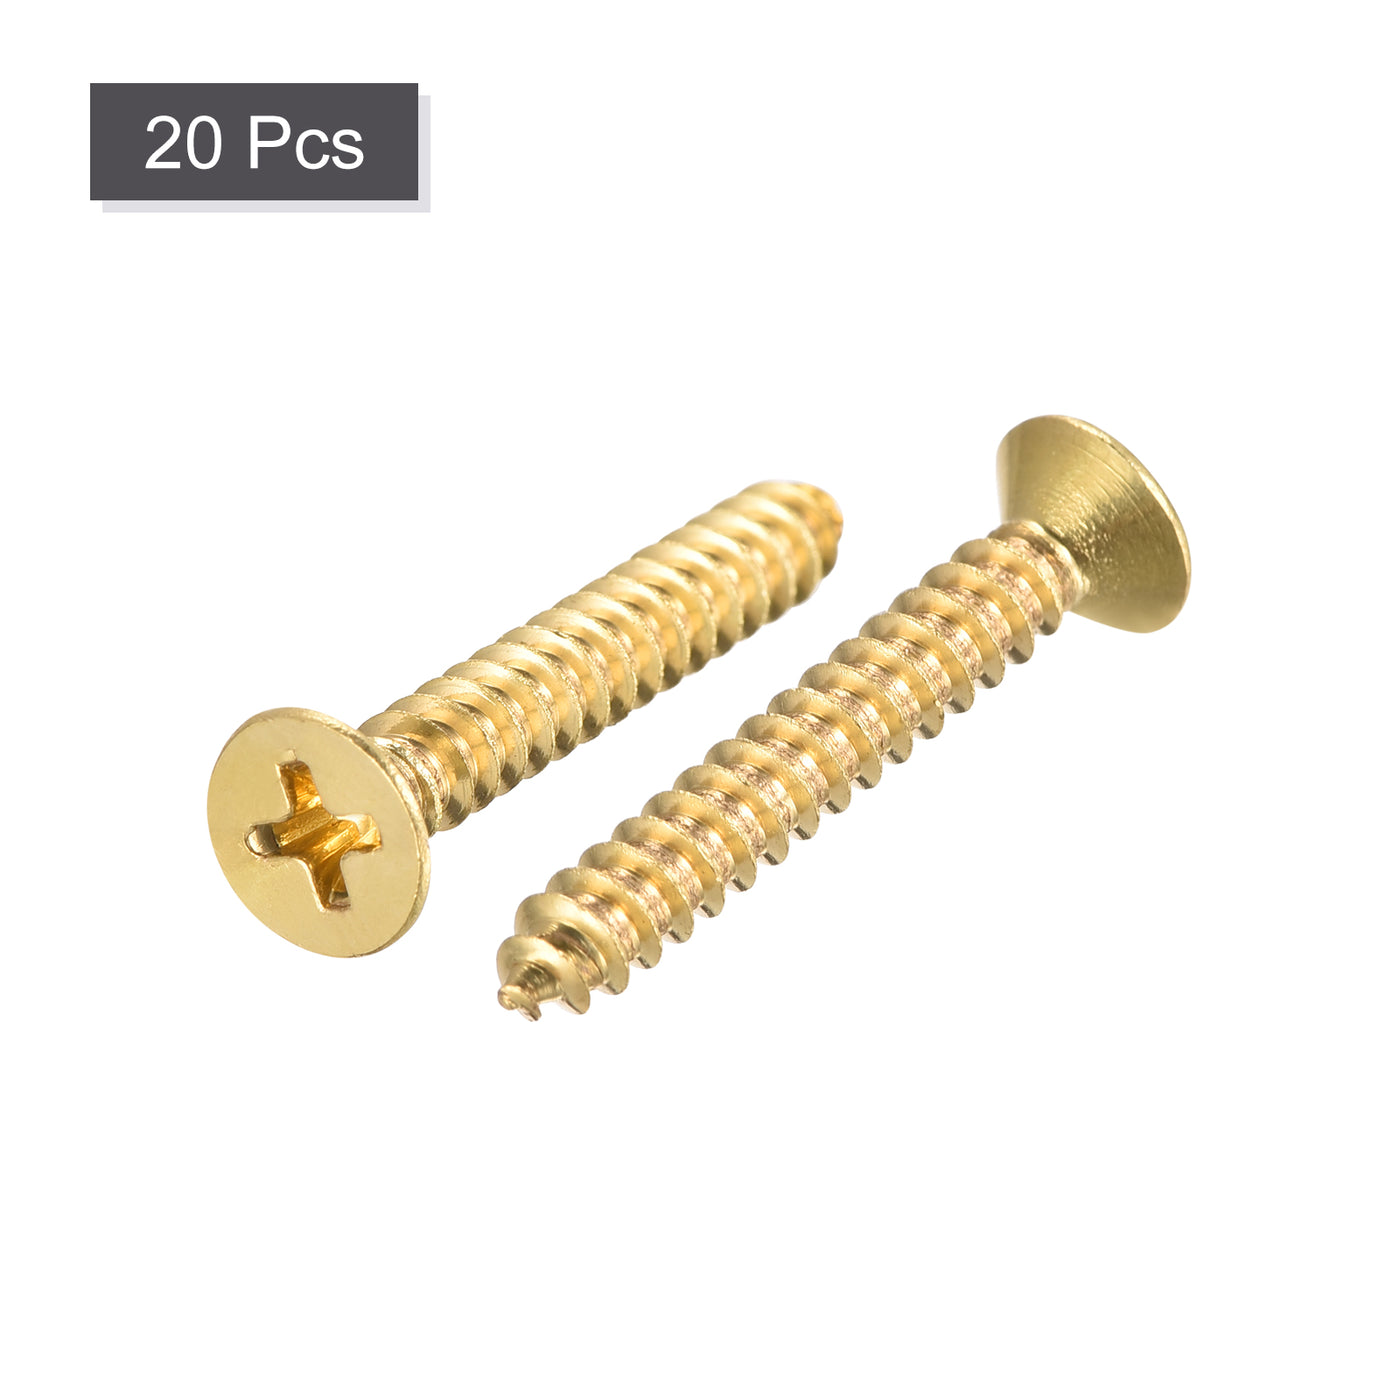 uxcell Uxcell Brass Wood Screws, M5x30mm Phillips Flat Head Self Tapping Connector for Door Hinges, Wooden Furniture, Home Appliances 20Pcs